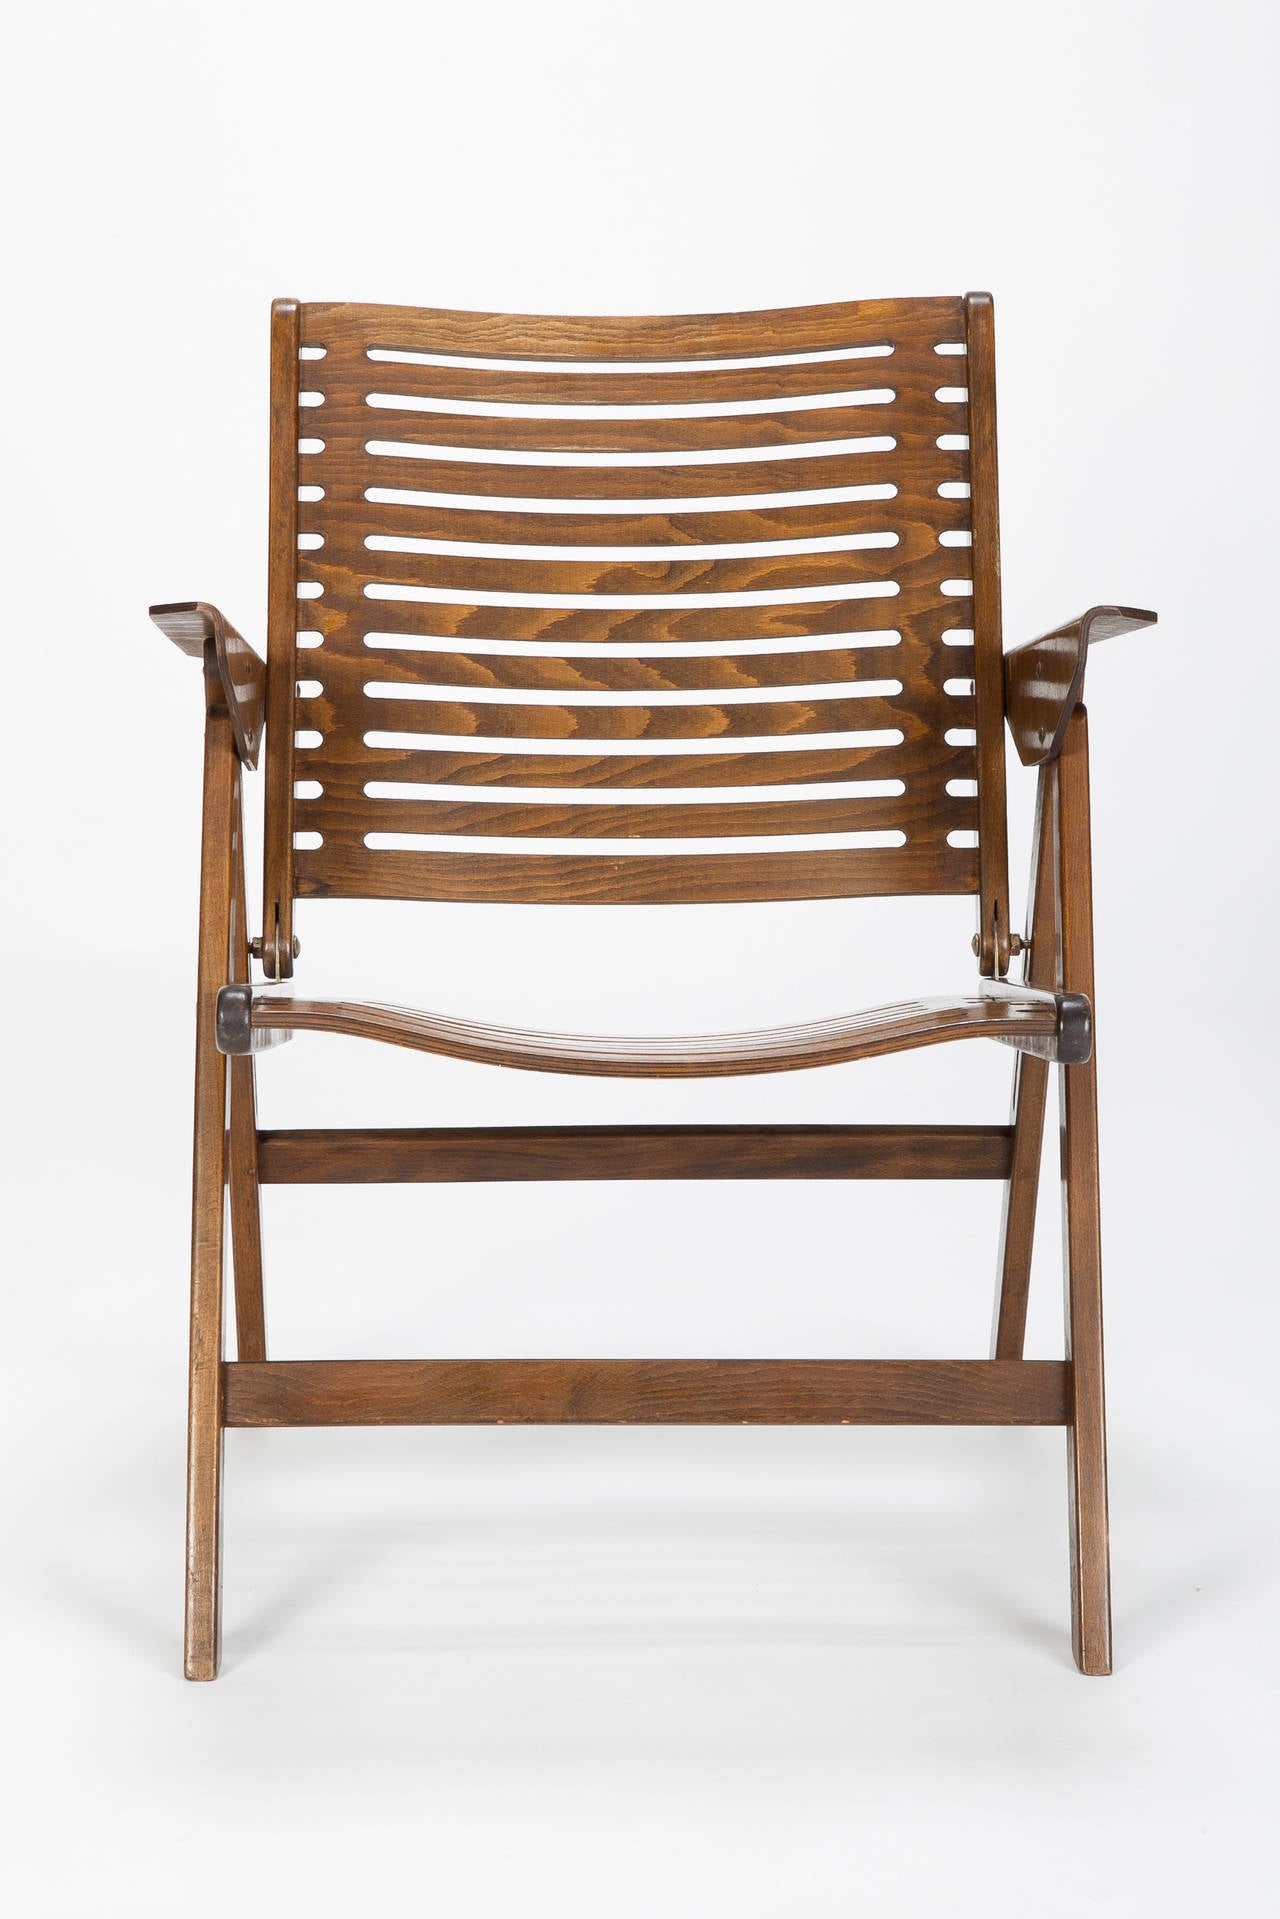 Wonderful folding chair, model Rex by the Slovenian designer Nico Kralj, manufactured in the 1950s by Stol Kamnik in Slovenia. Made of stained beech wood, all parts in a great and original condition!